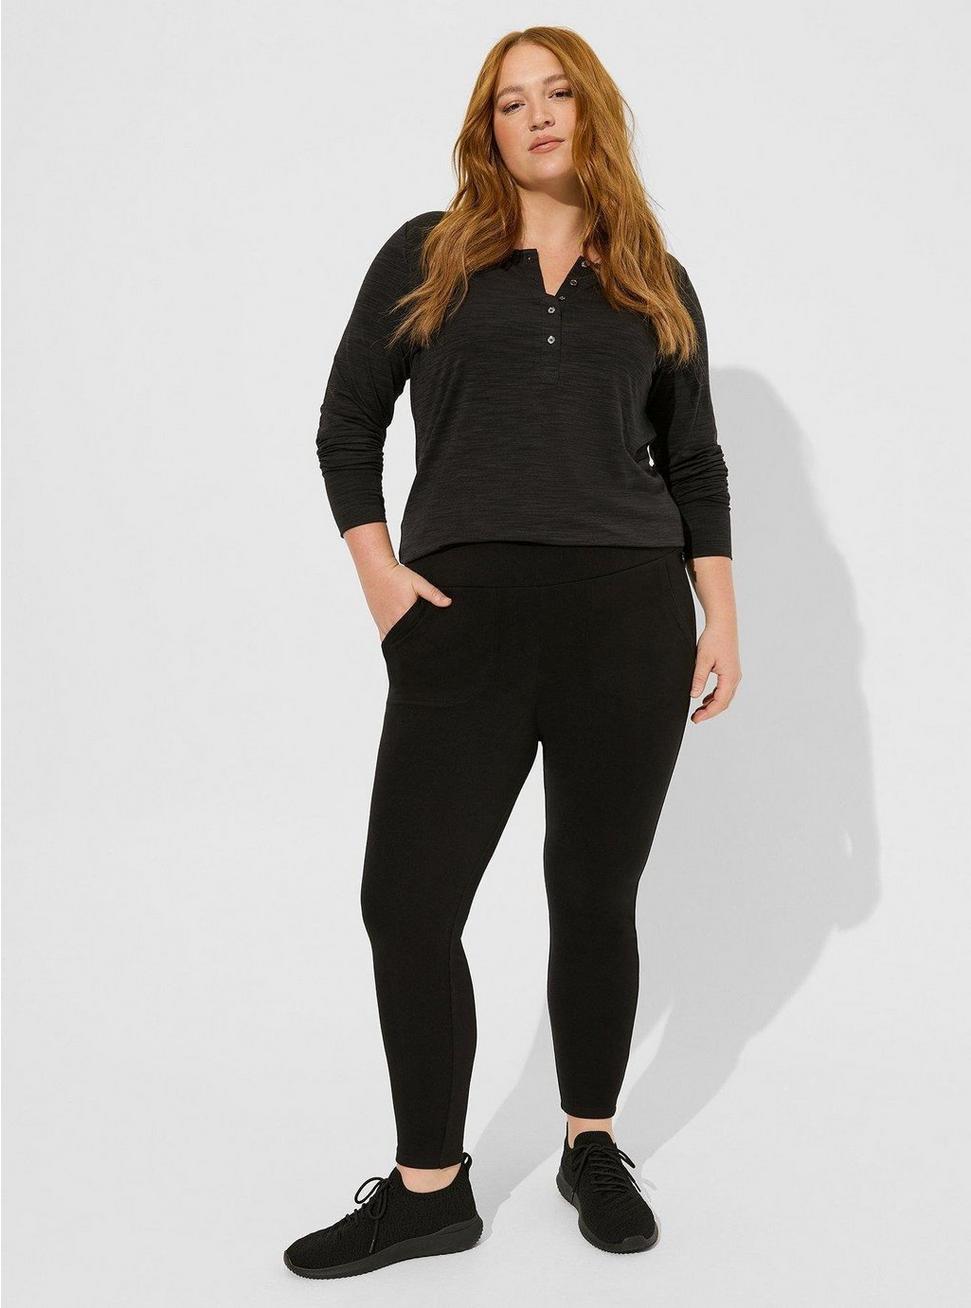 Plus Size Happy Camper Micro Fleece Full Length Active Legging with Front Pockets, DEEP BLACK, hi-res